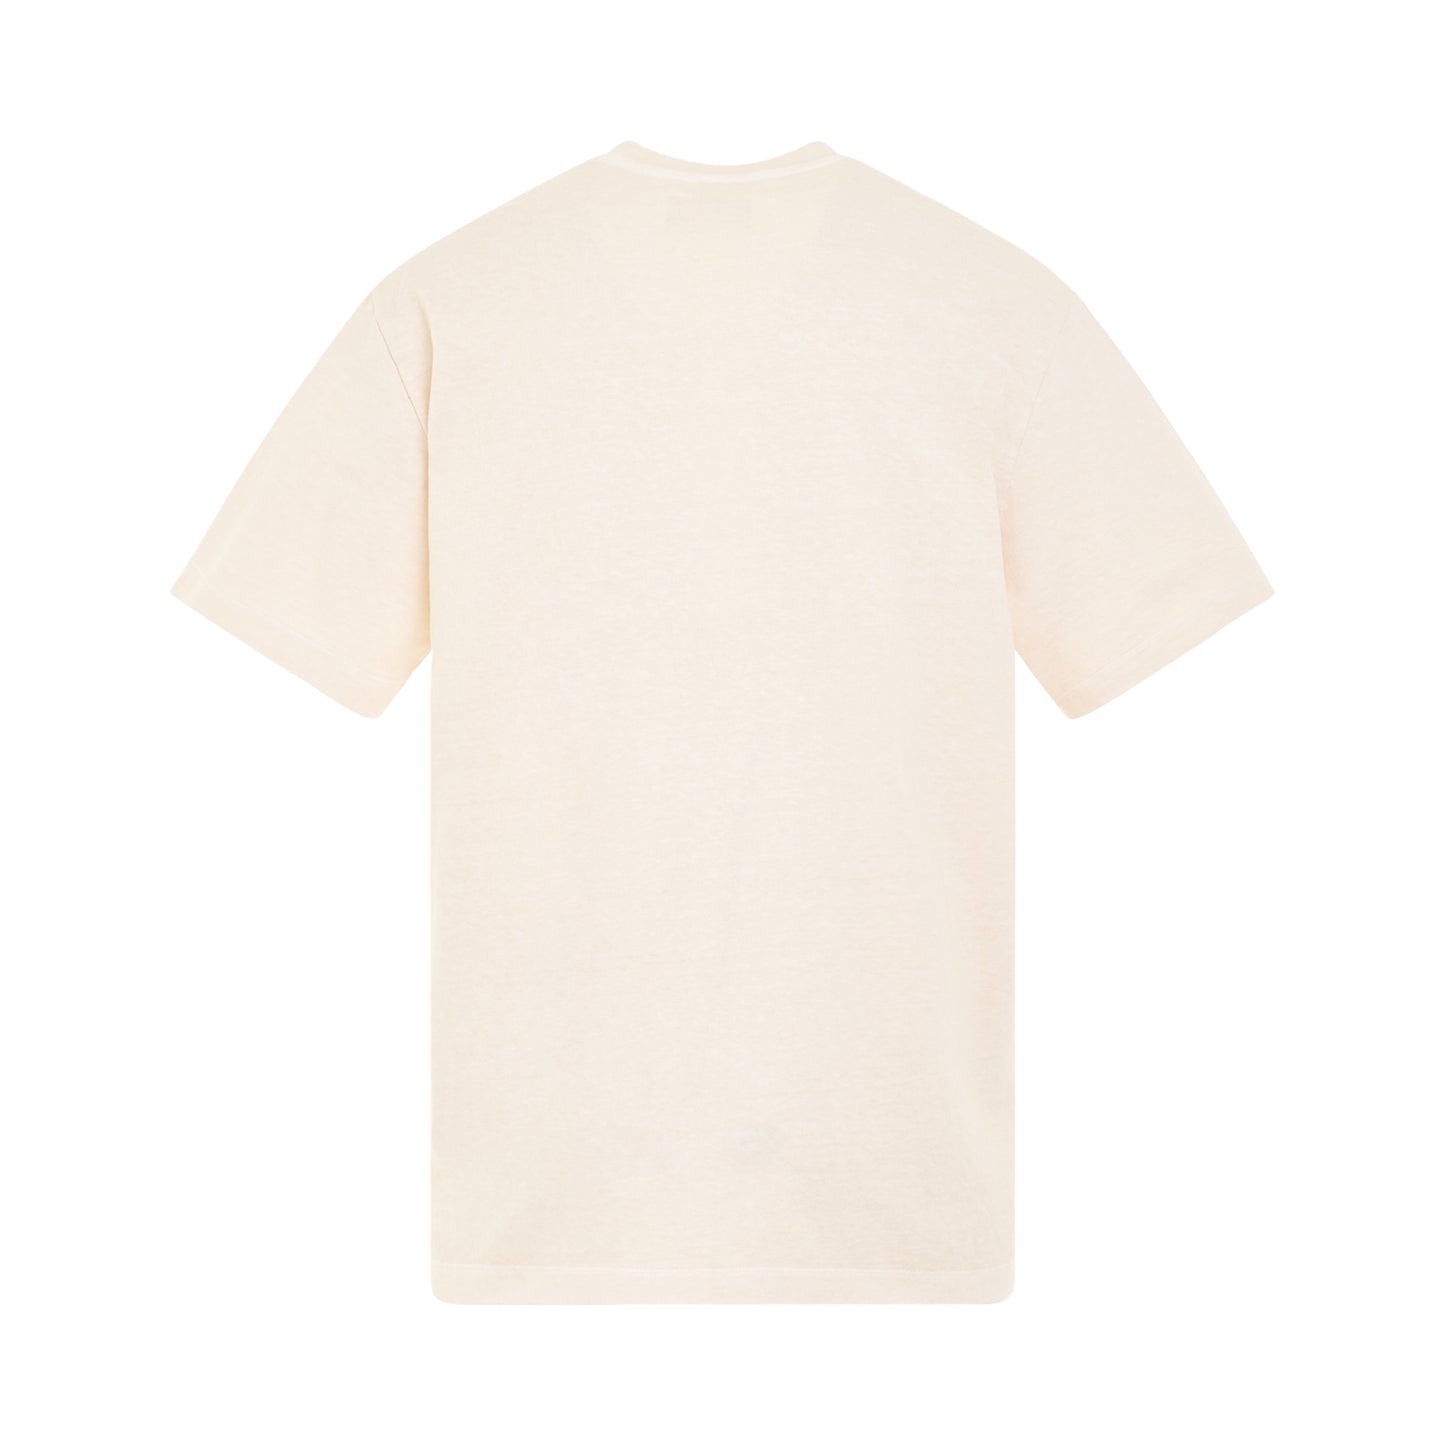 "DOUBLAND" Embroidery T-Shirt in White